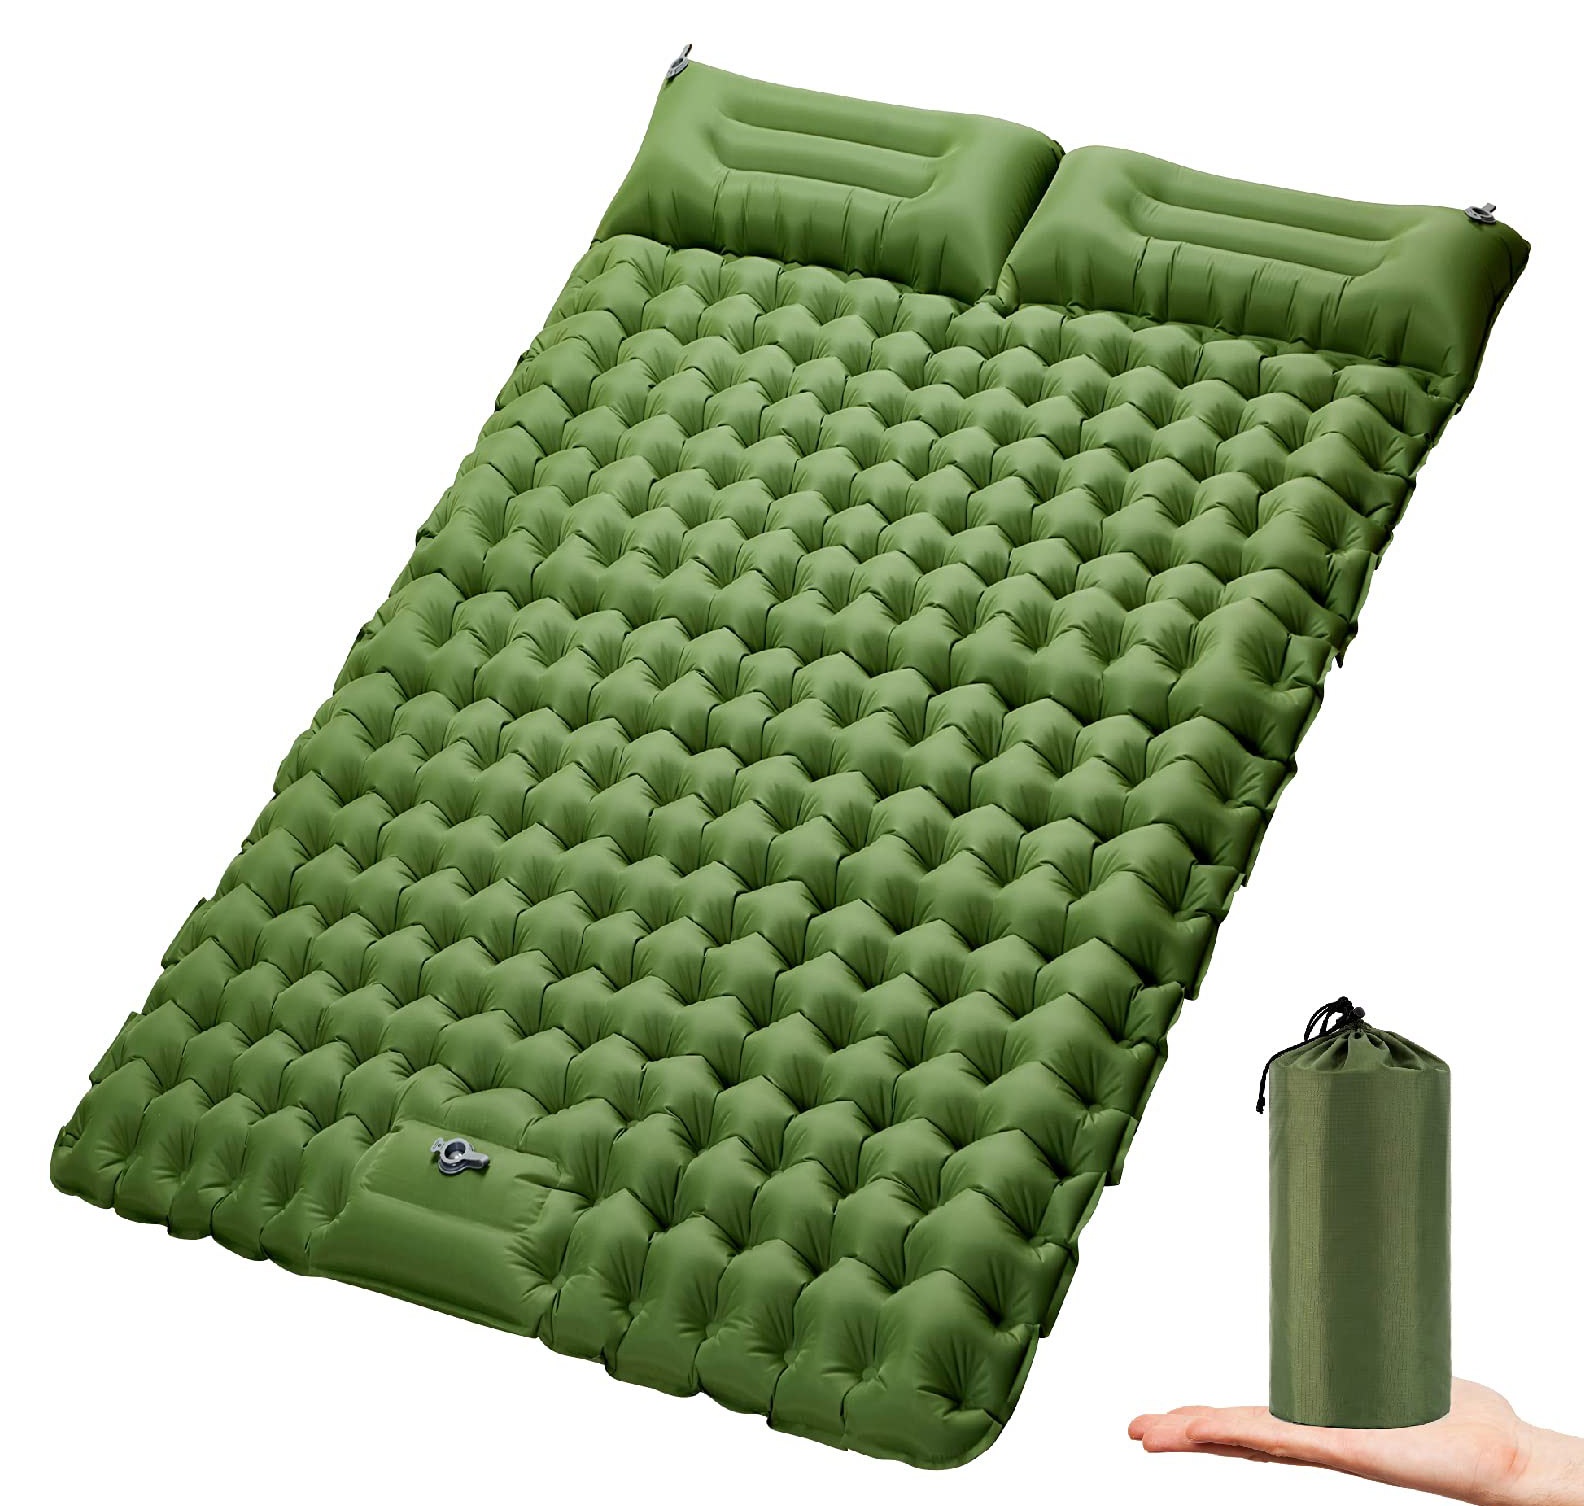 Double Person Camping Sleeping Air Mats Self Inflating Air Mattress Designed for Tent and Family